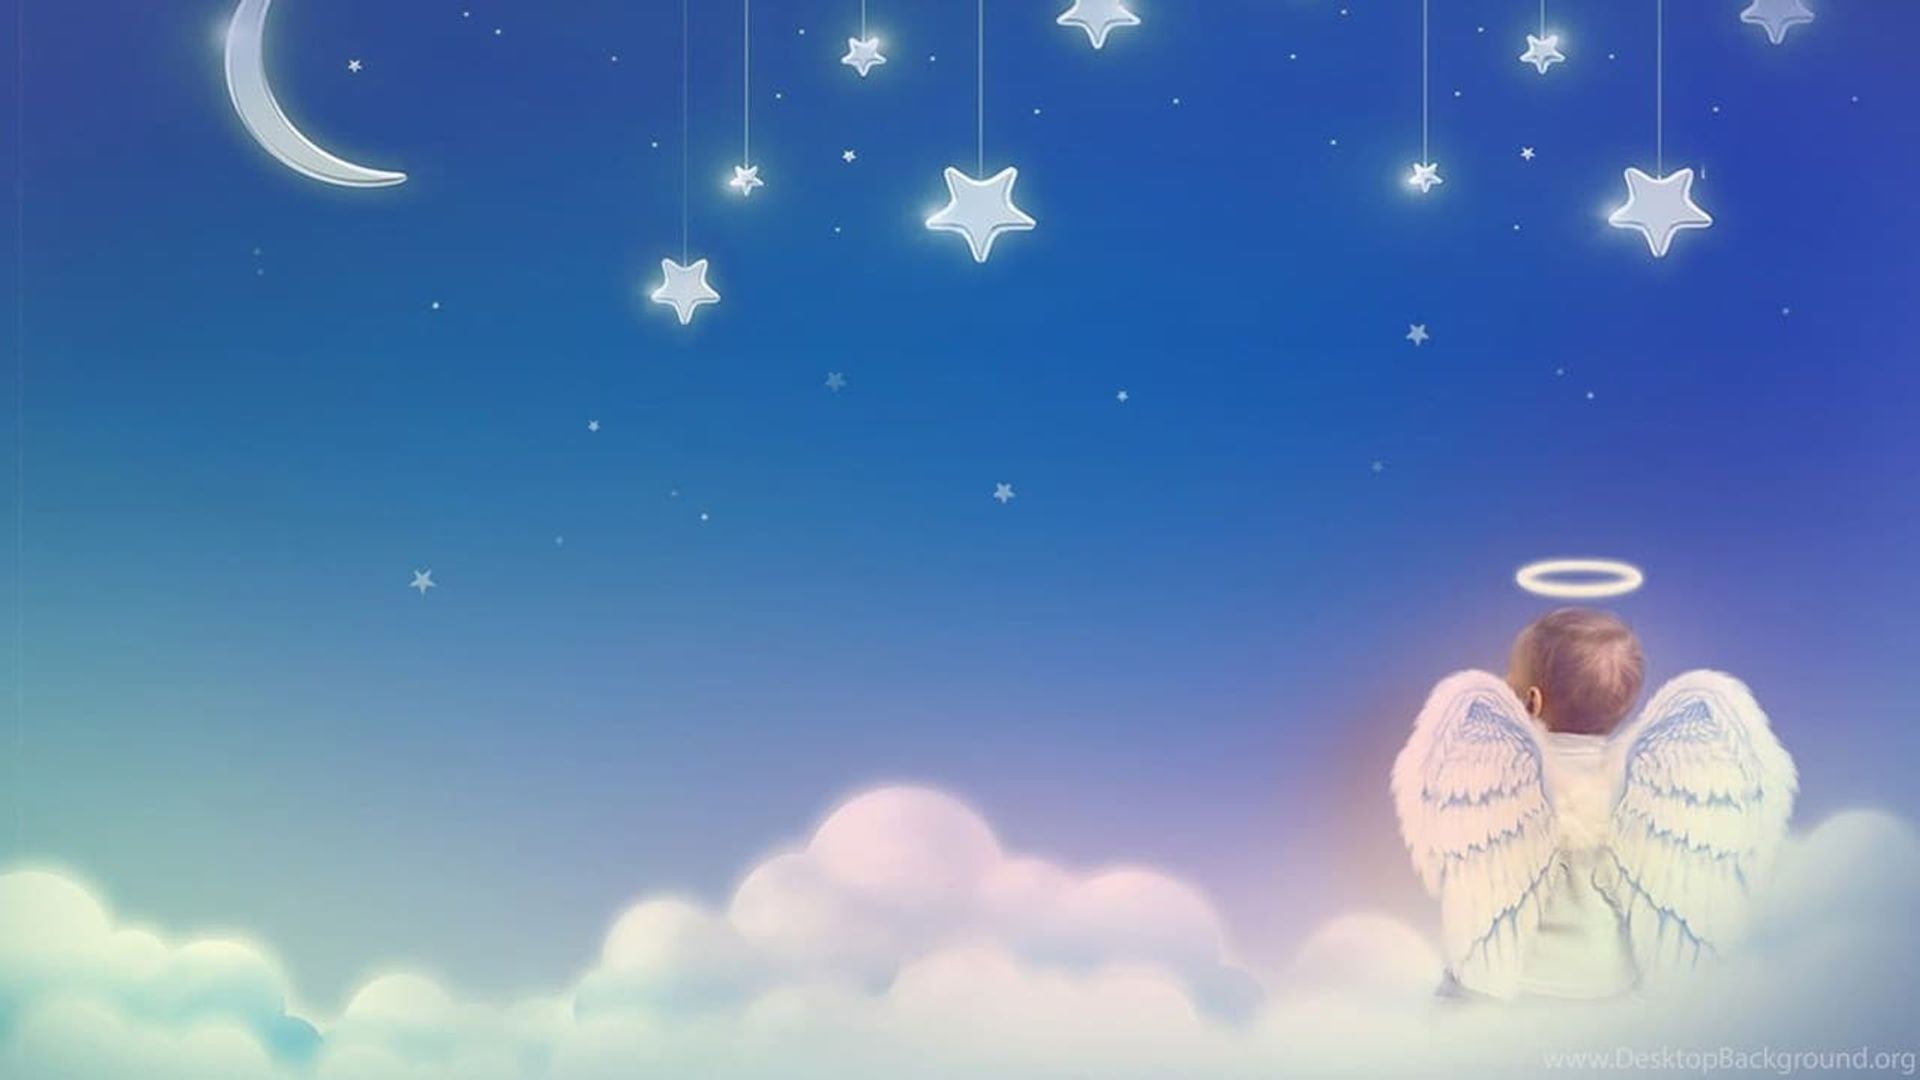 Little Angels: The Brightest Christmas background